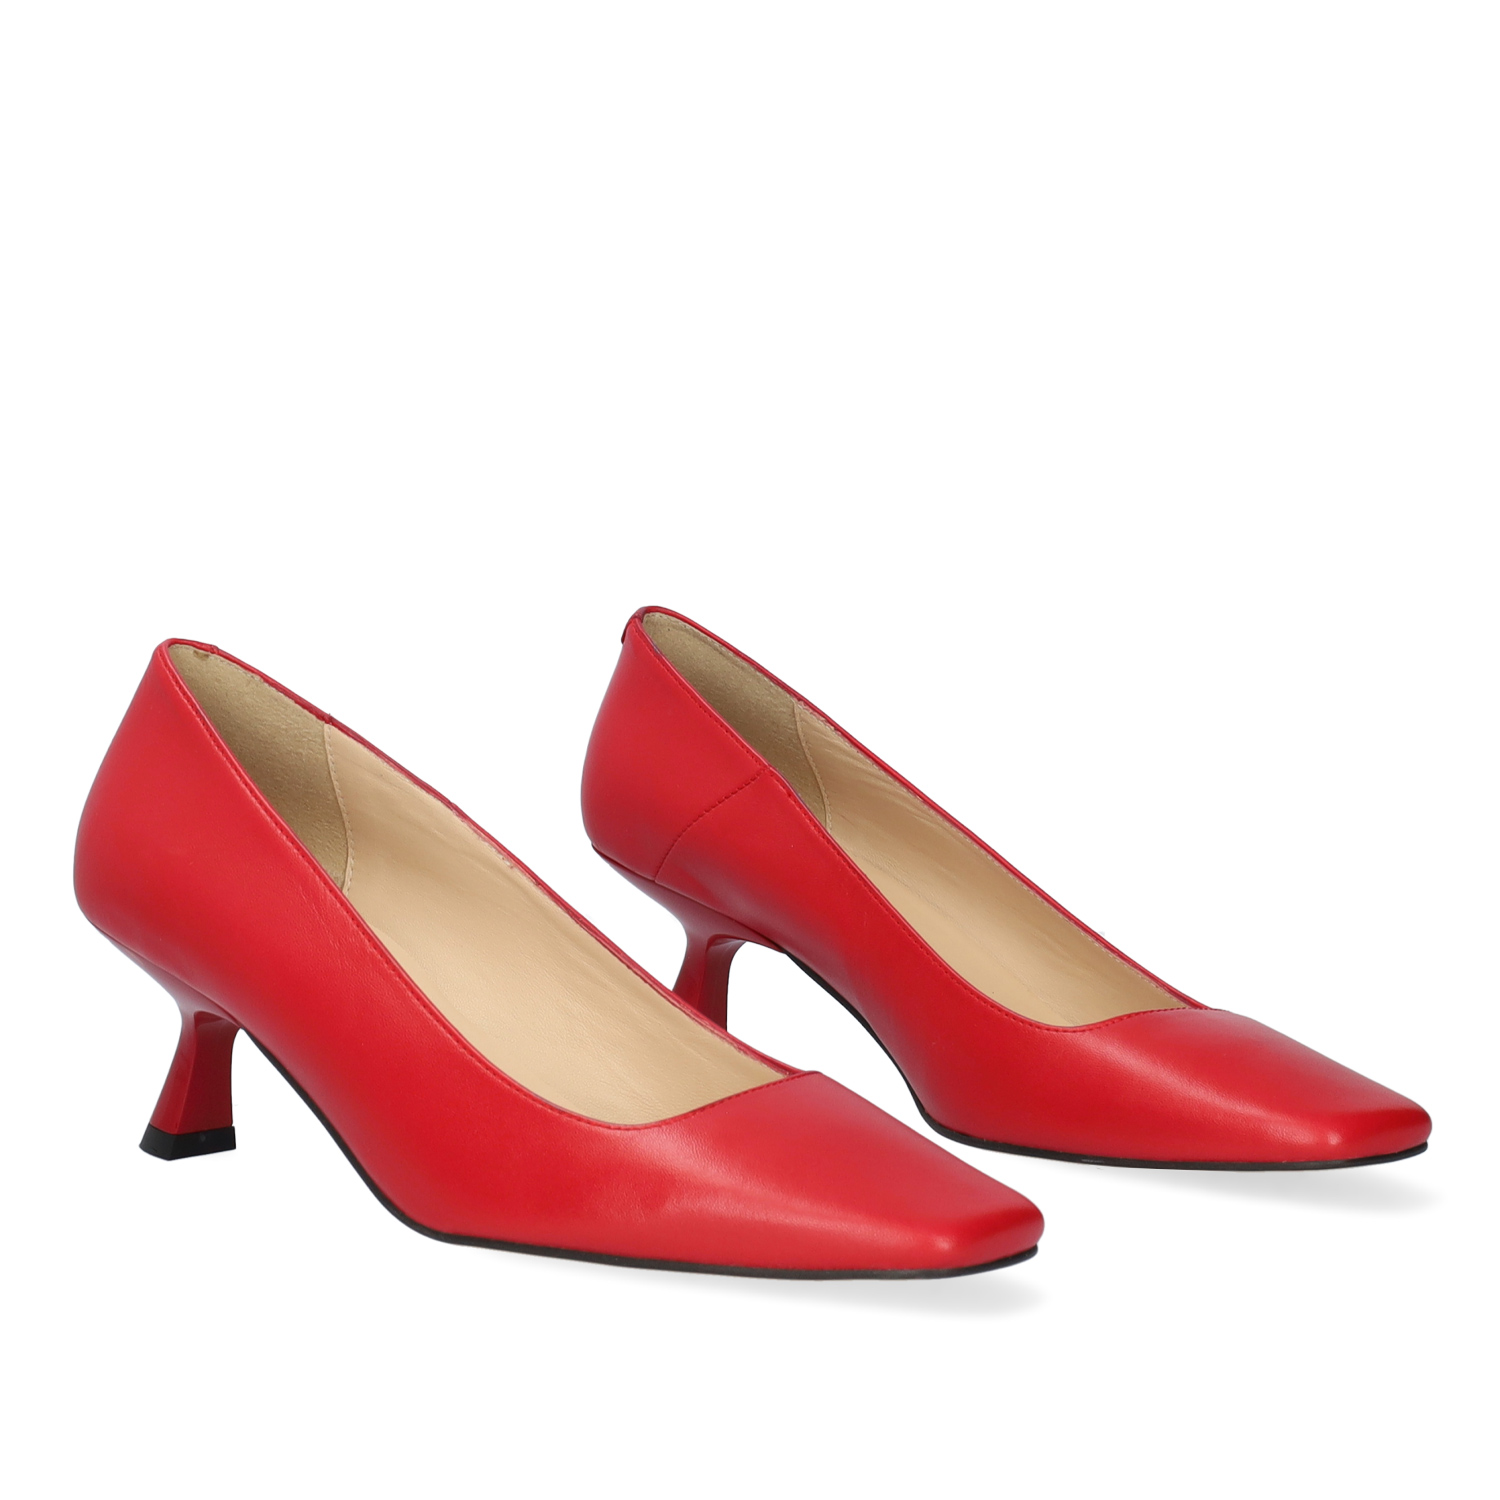 Heeled shoes in red leather 